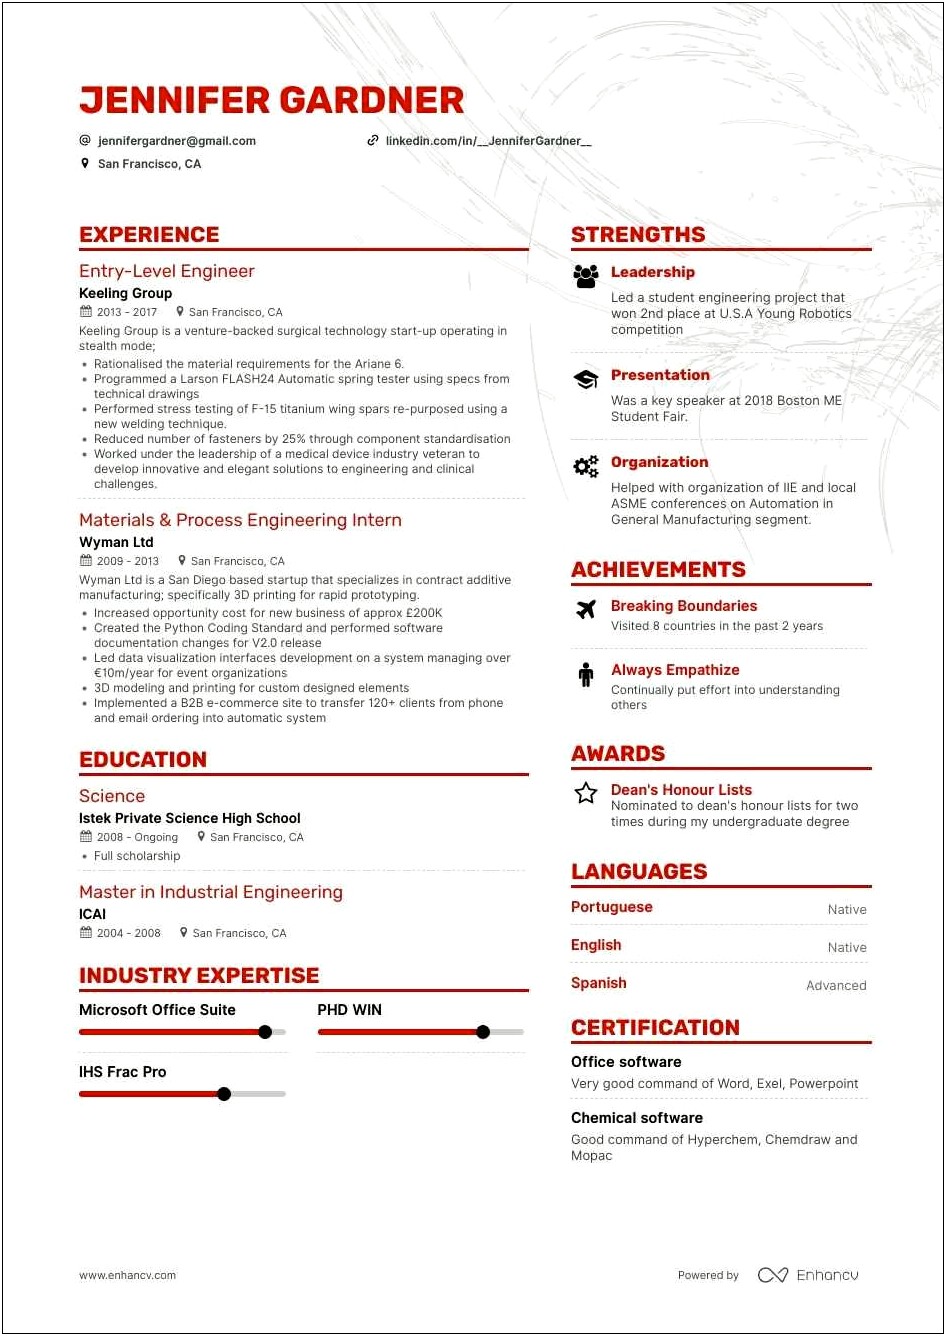 Resume For Ca Final Student For Job